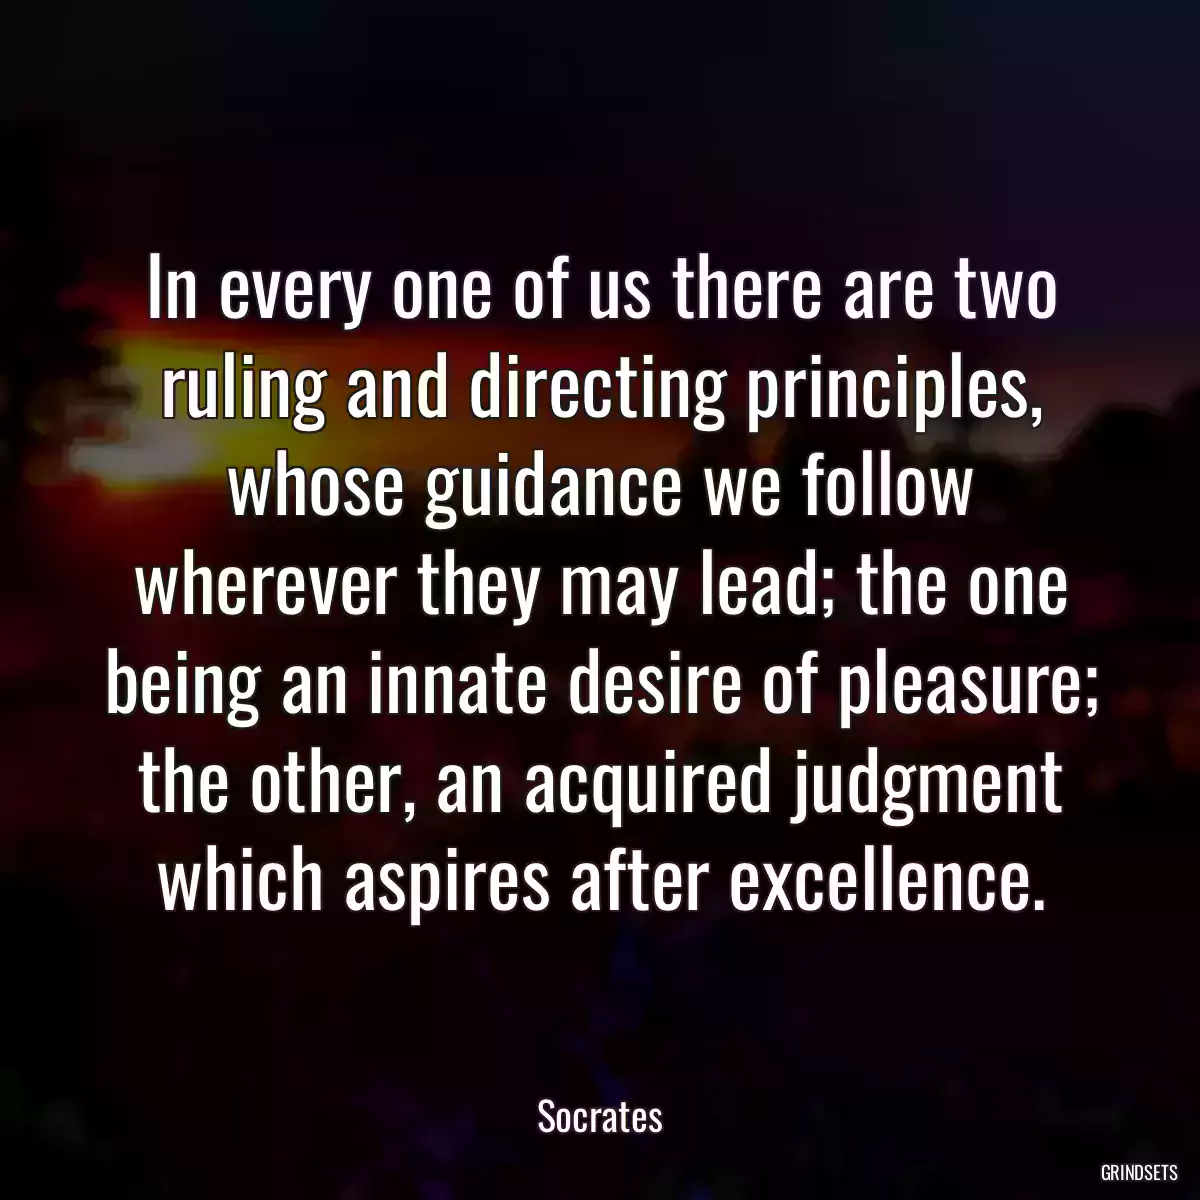 In every one of us there are two ruling and directing principles, whose guidance we follow wherever they may lead; the one being an innate desire of pleasure; the other, an acquired judgment which aspires after excellence.